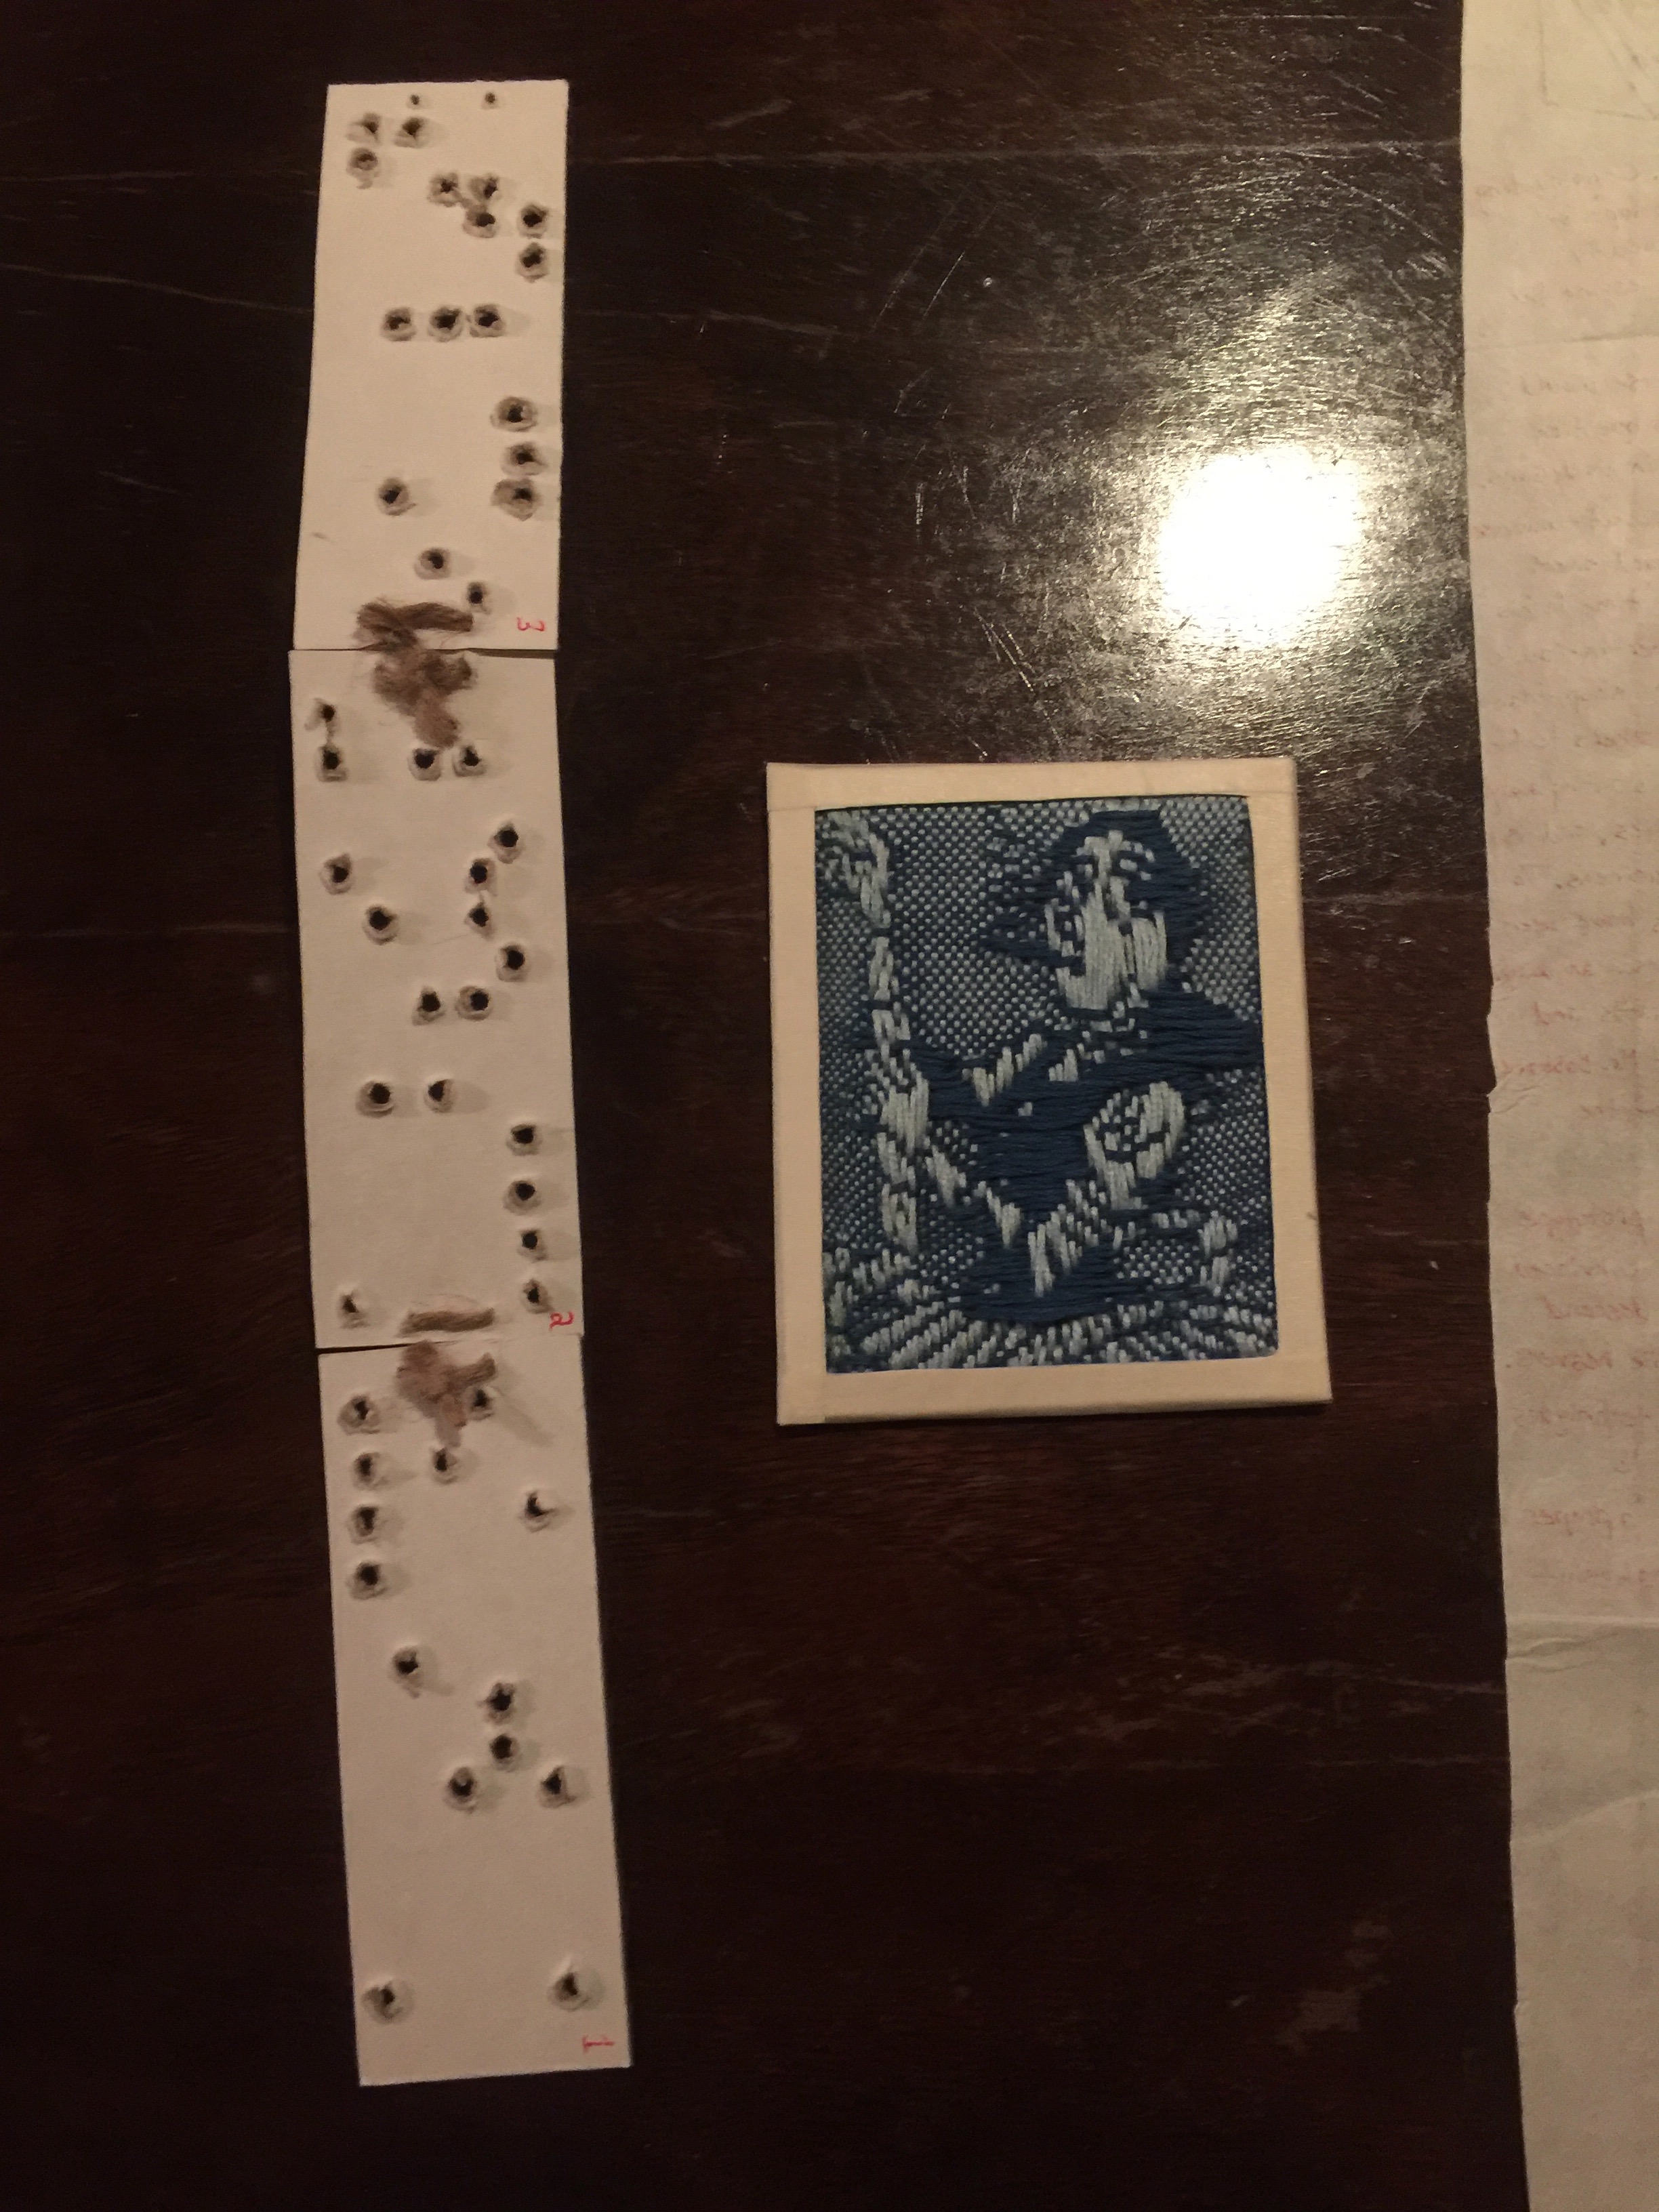 A loom punchcard and woven Ada Lovelace